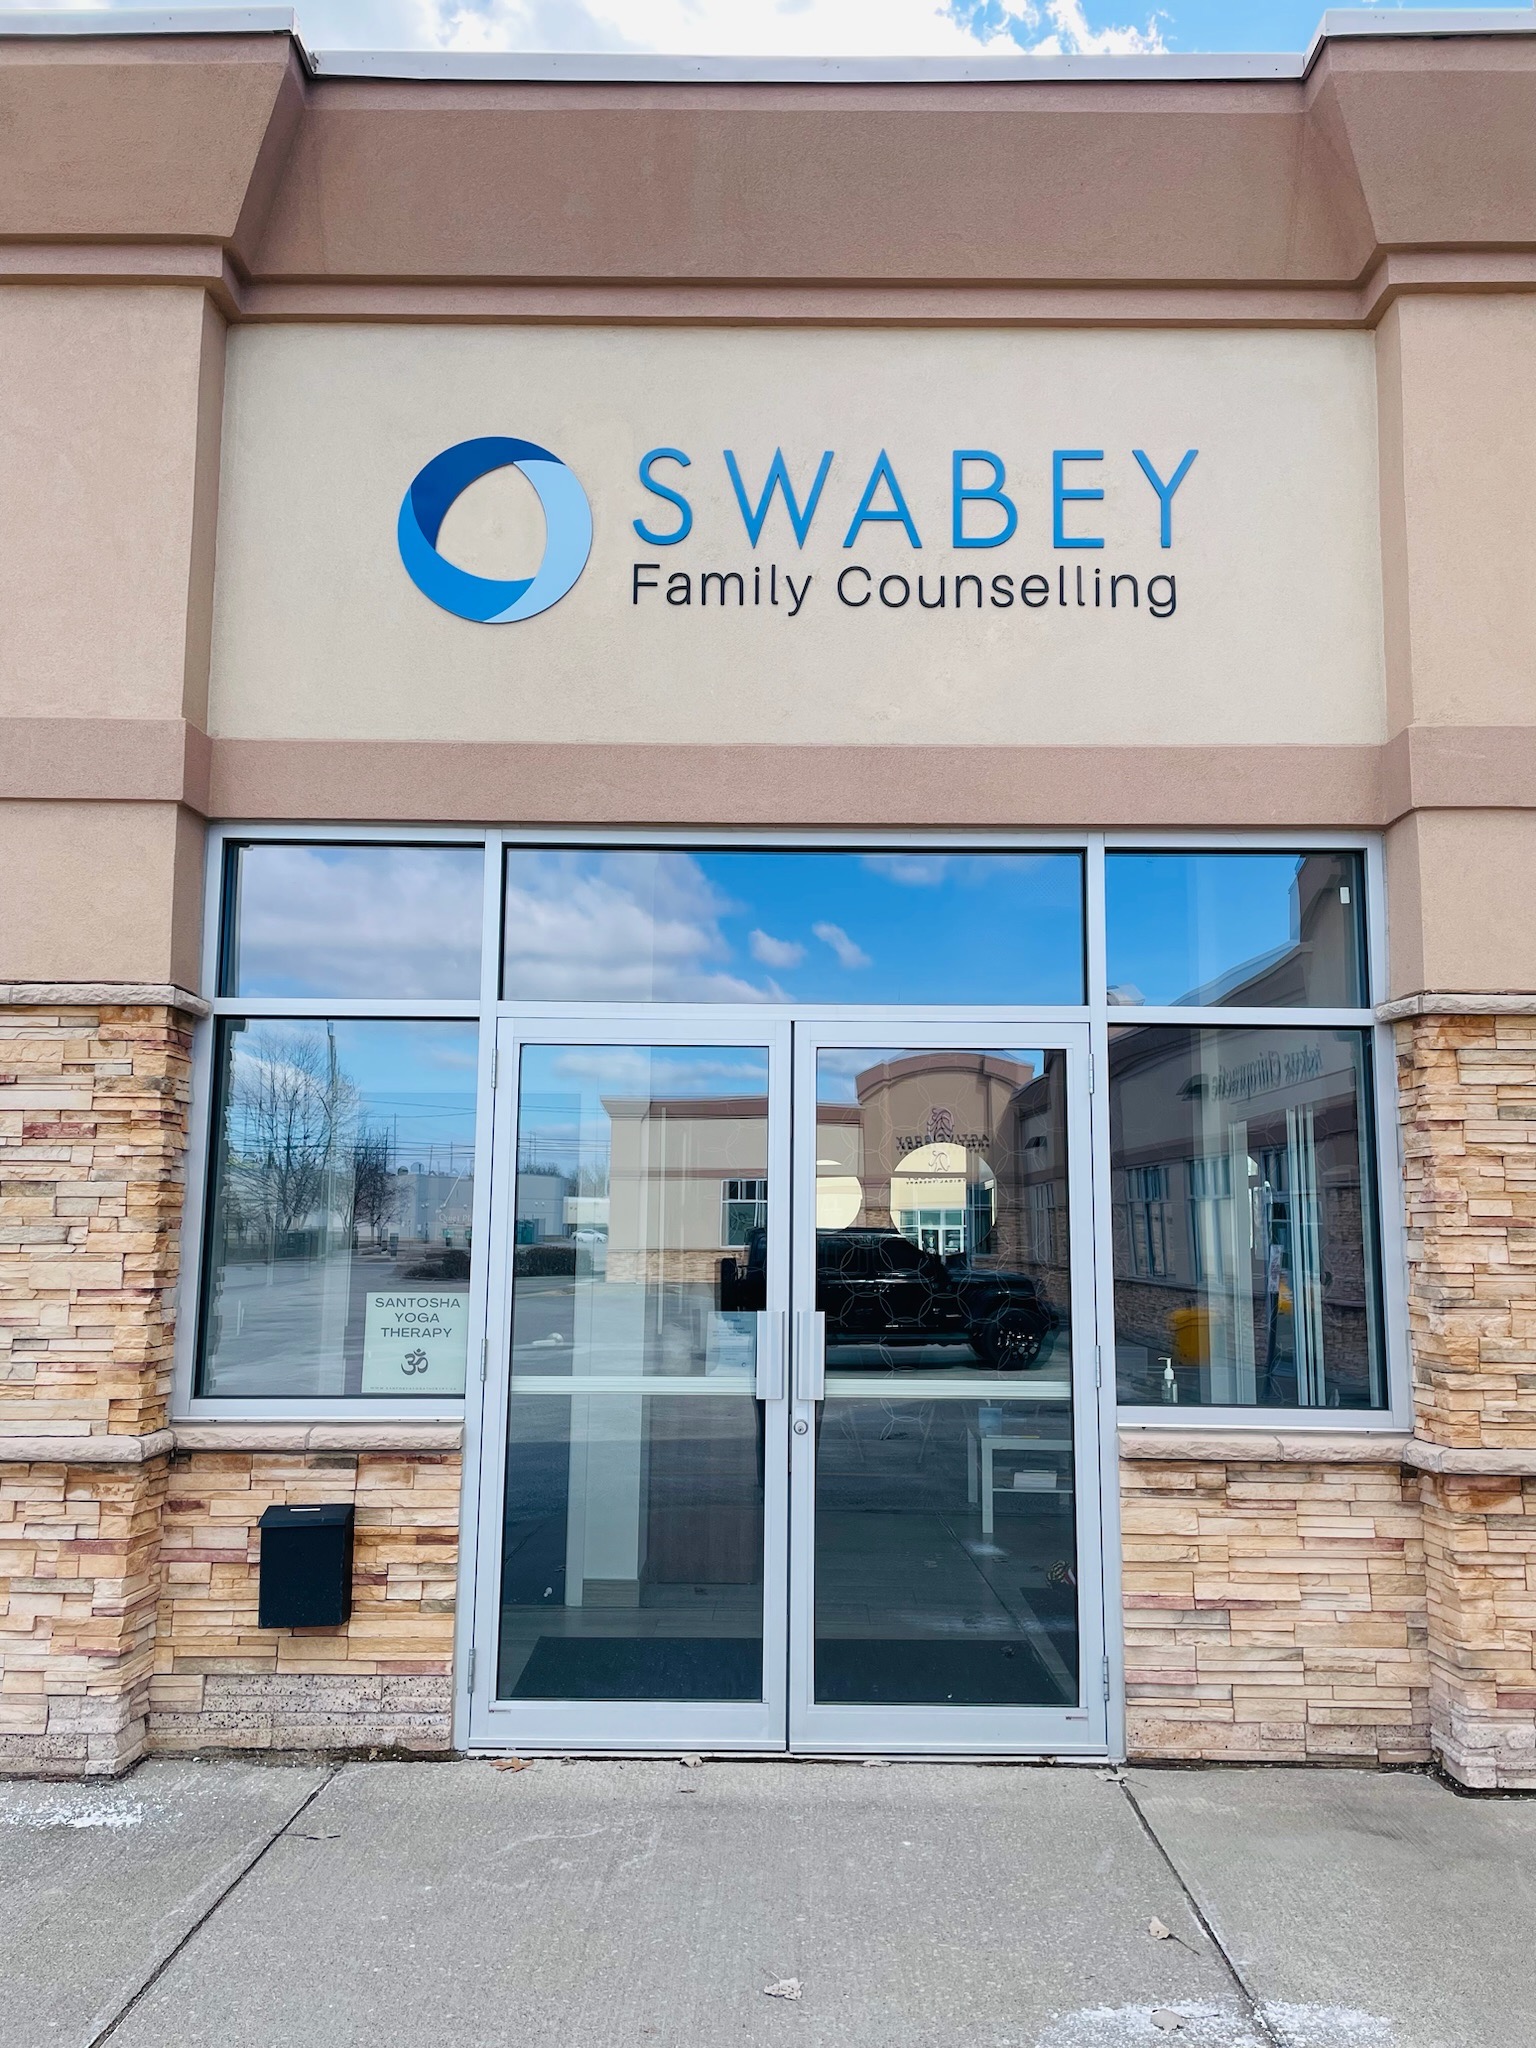 Swabey Family Counselling office entrance in LaSalle, Ontario.